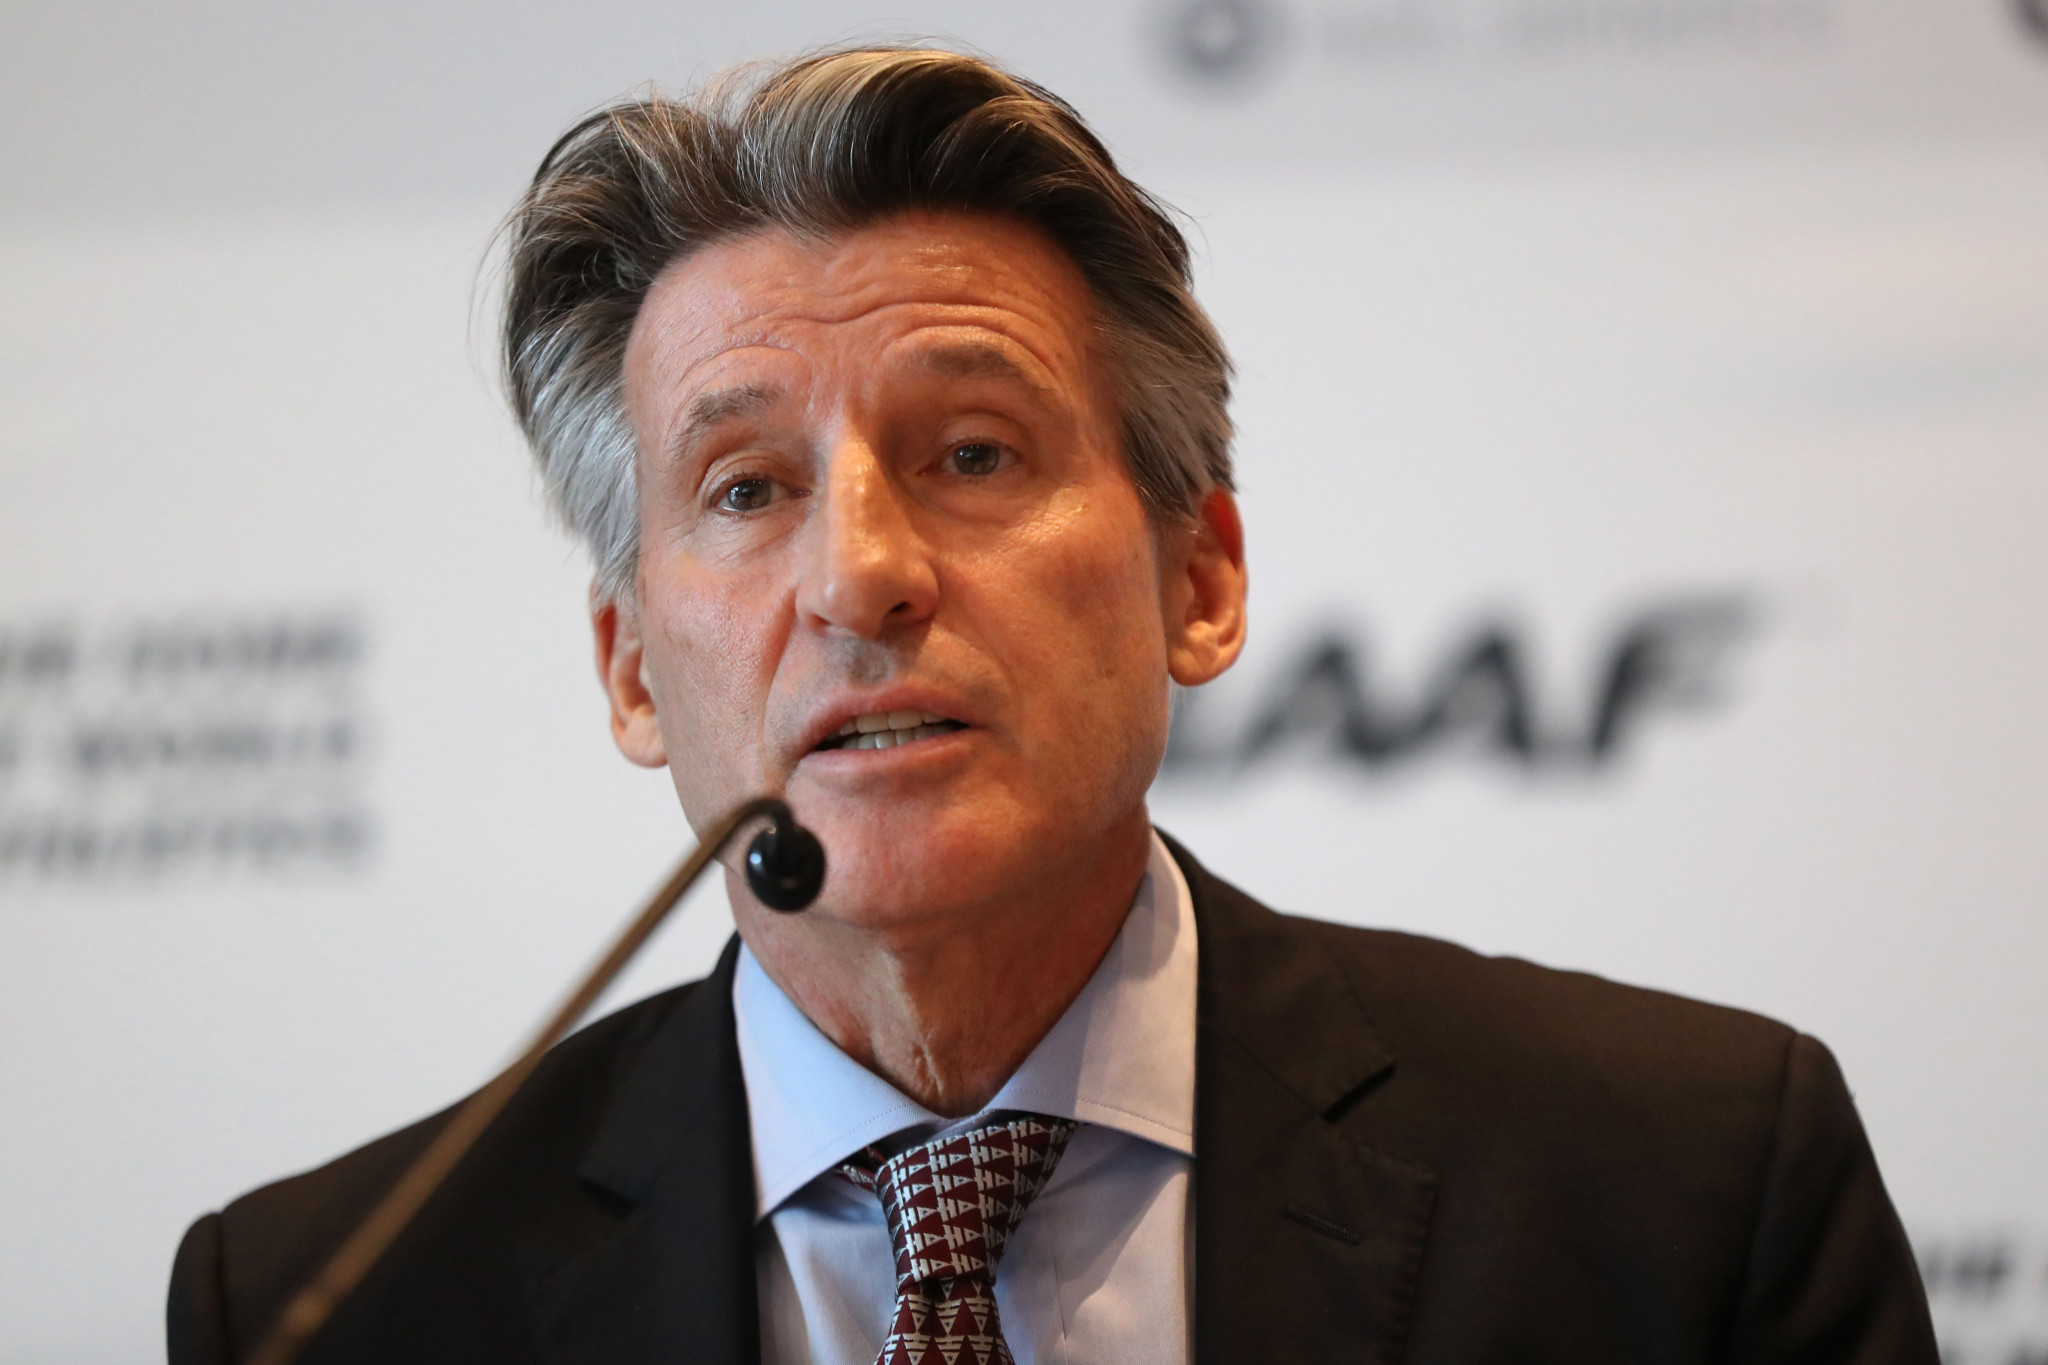 IAAF update guidelines for authorised neutral athletes after Russia ban extended